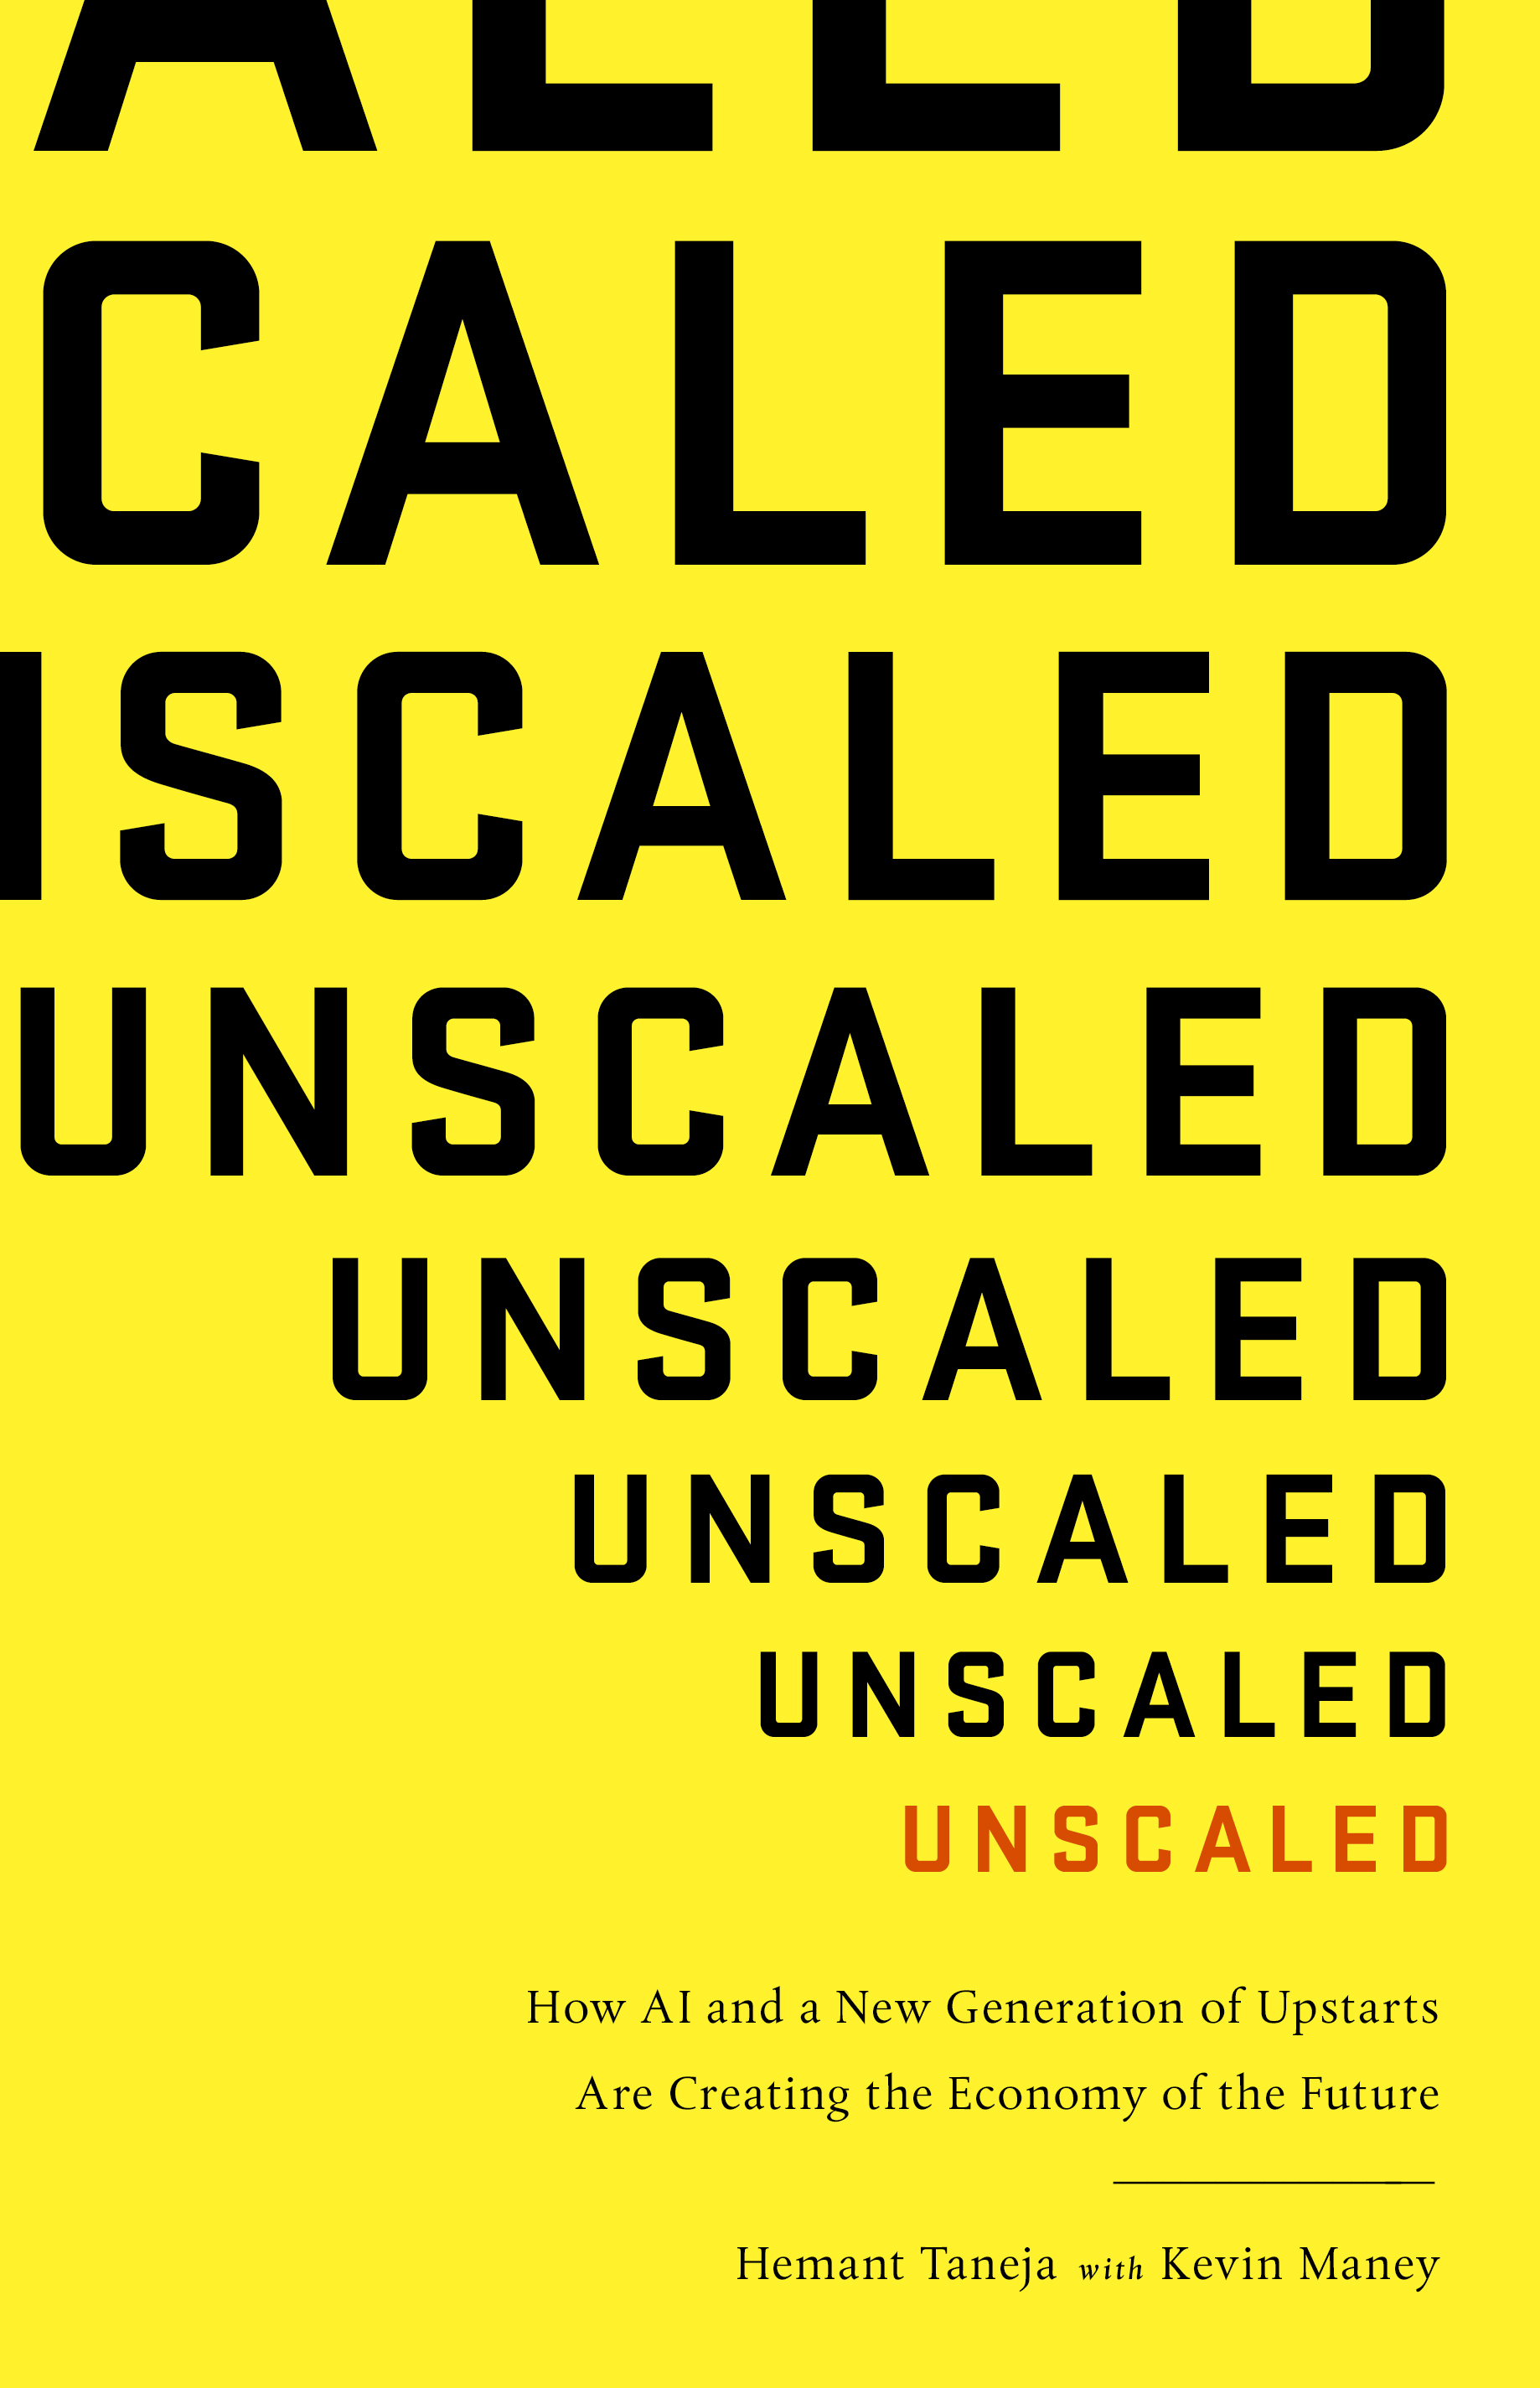 “Unscaled: How AI and a New Generation of Upstarts Are Creating the Economy of the Future” by Hemant Taneja with Kevin Maney (PublicAffairs)